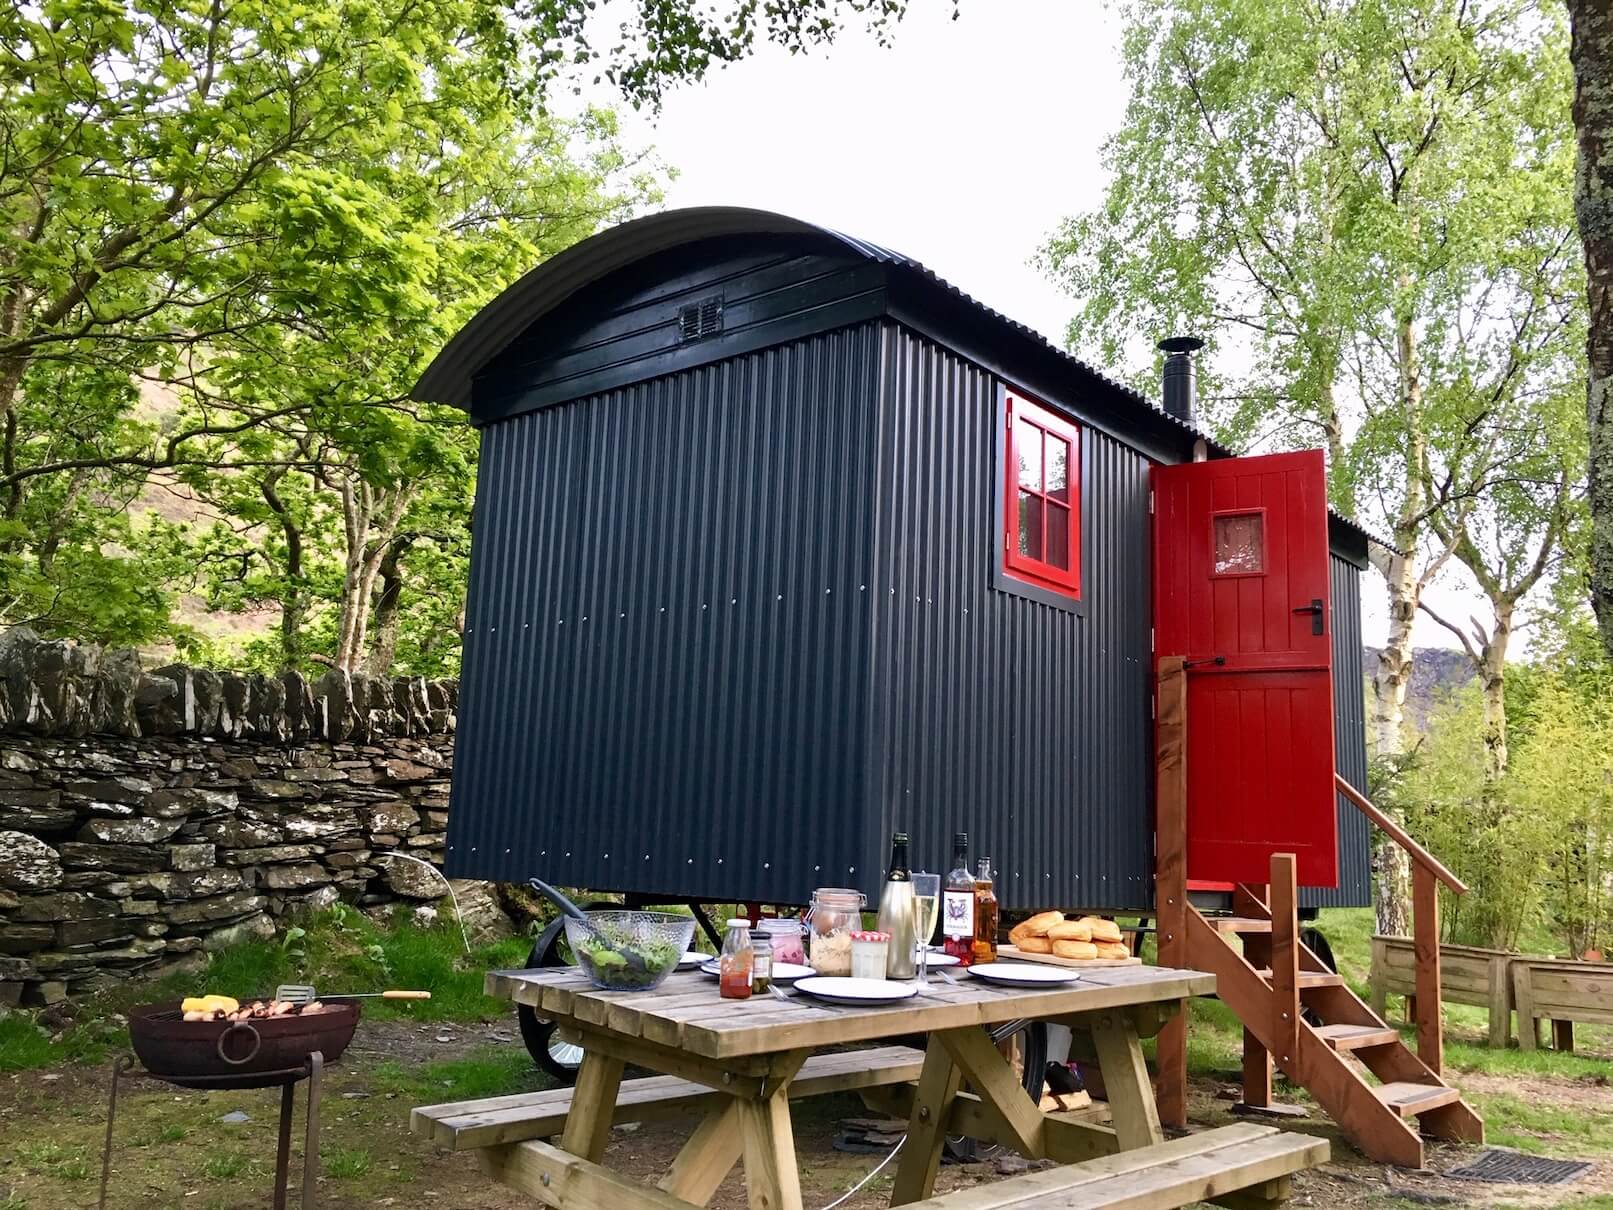 Snowdonia Holiday Cottage, Glamping North Wales, Snowdonia Camping Pods, Camp Site Snowdonia, glamping Break for 2